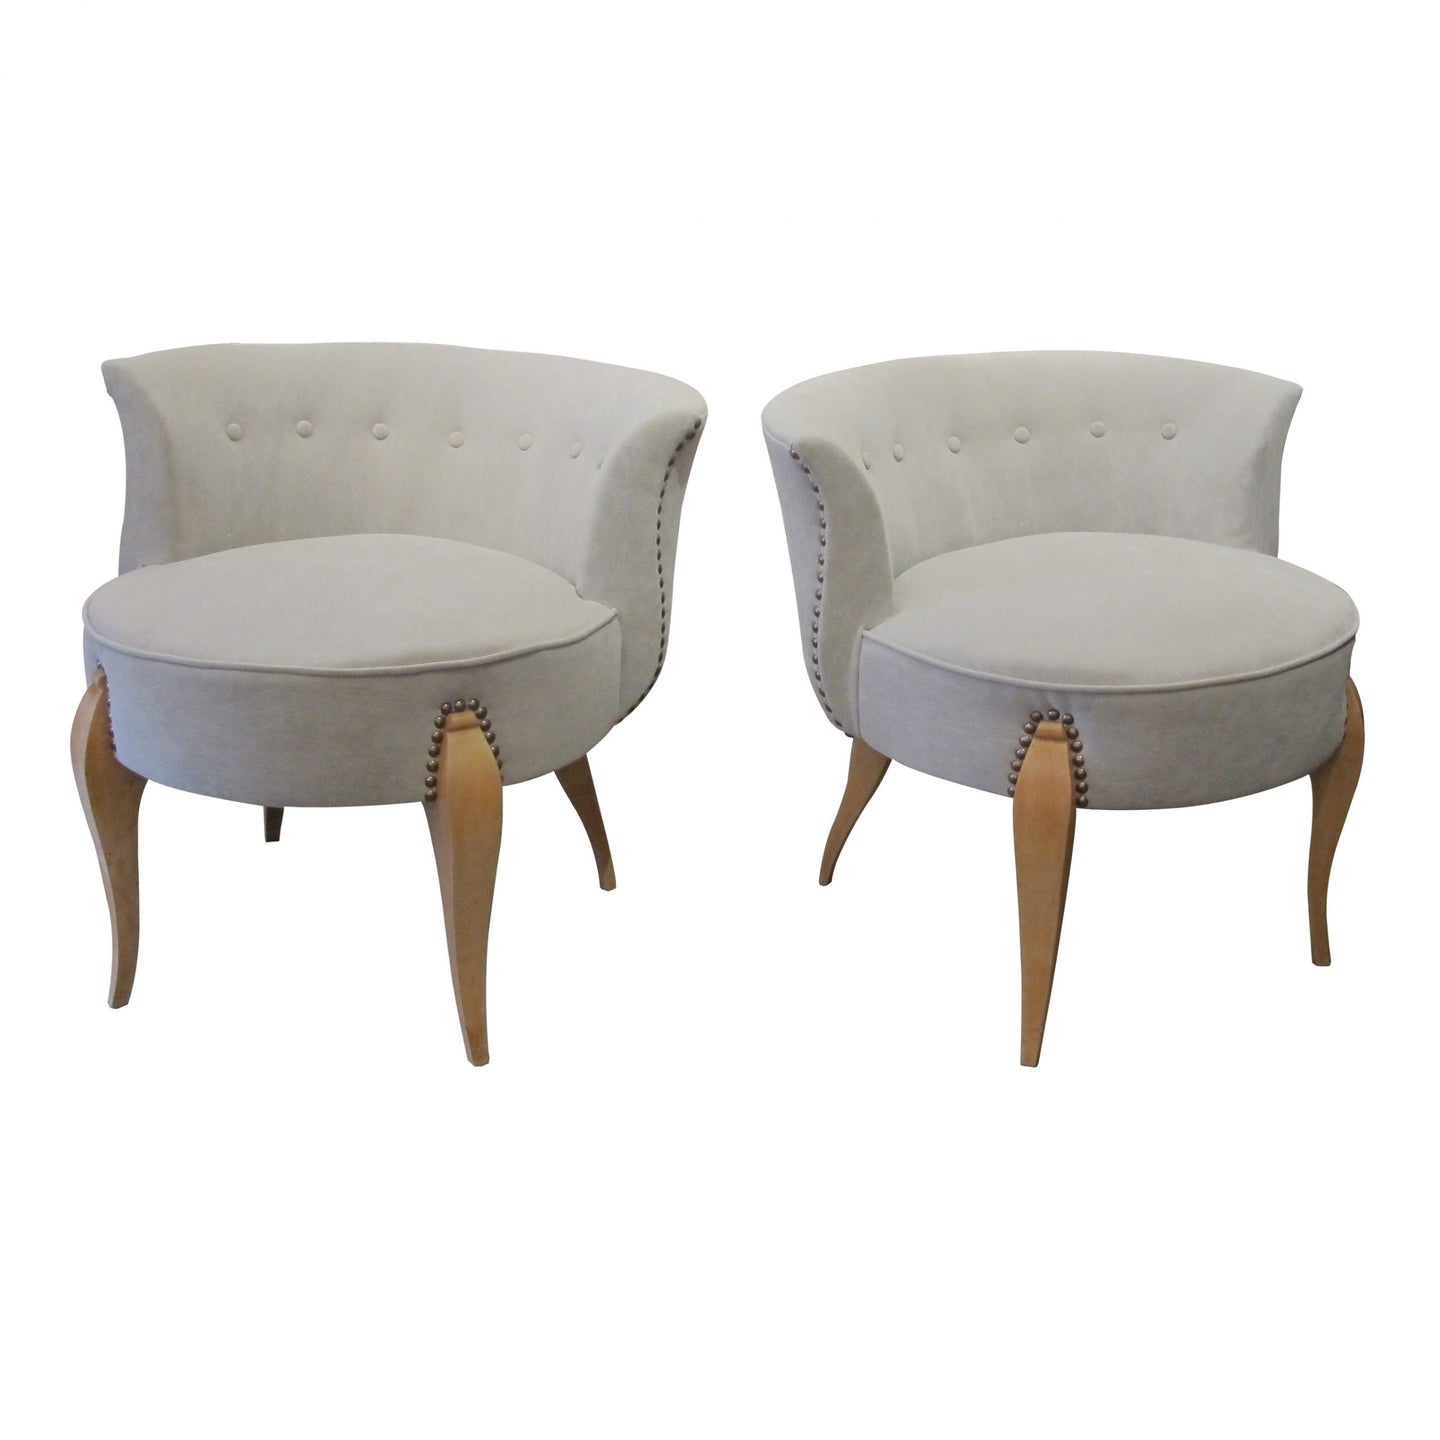 A pair of occasional chairs, Mid century, French